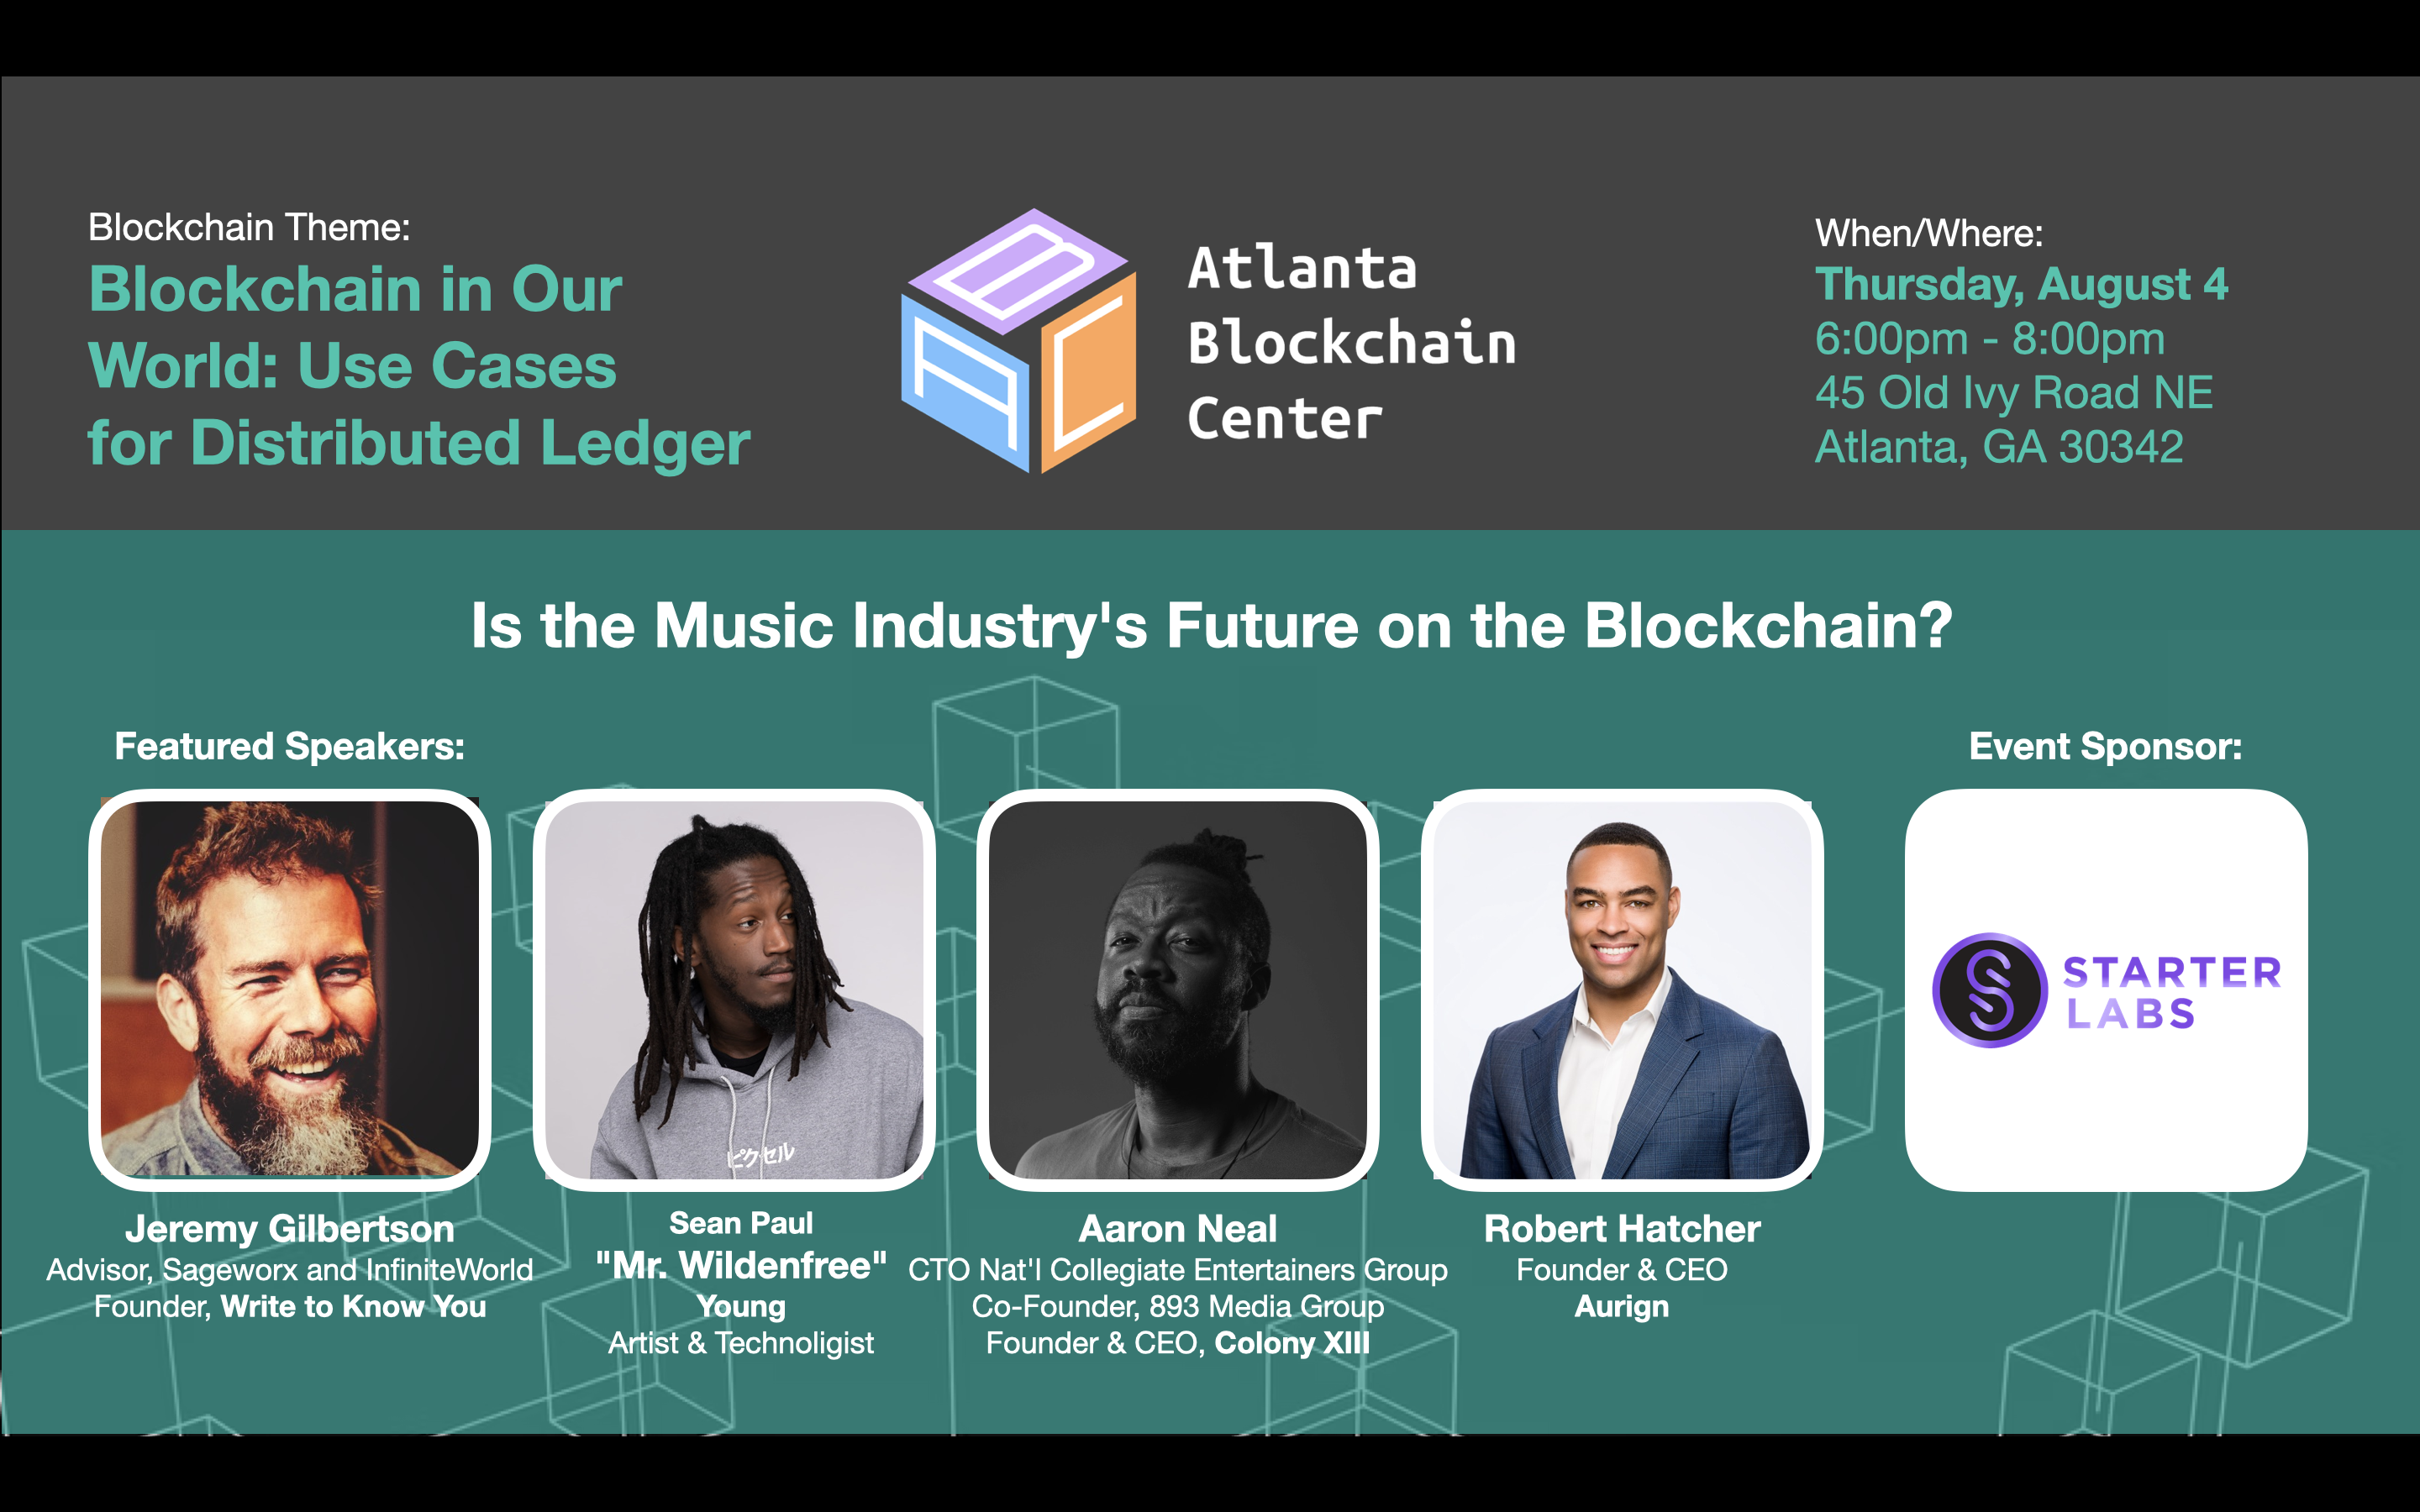 Is the Music Industry’s Future on the Blockchain?